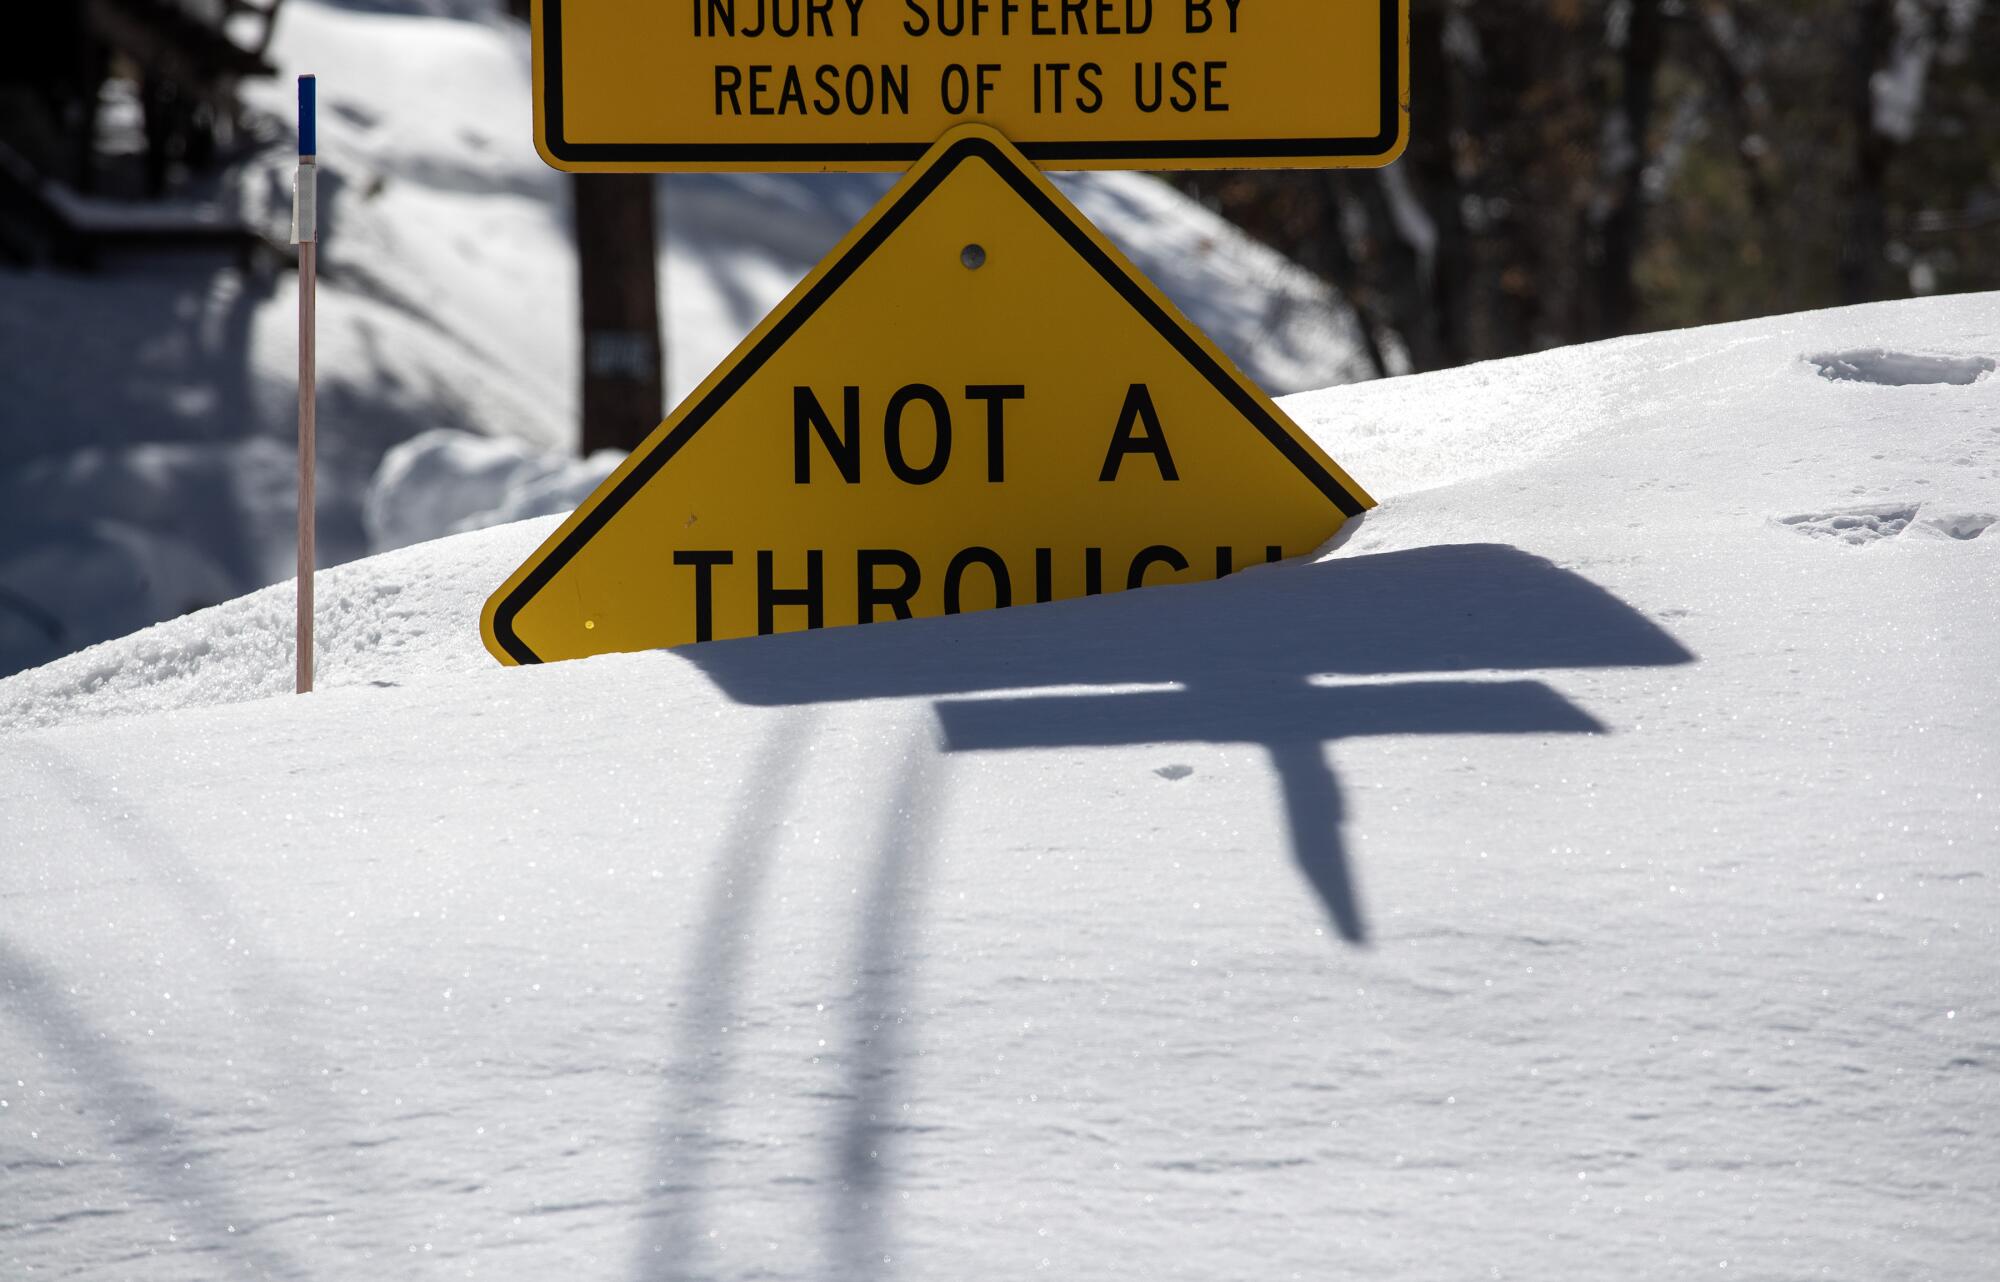 A street sign is nearly covered by snow.